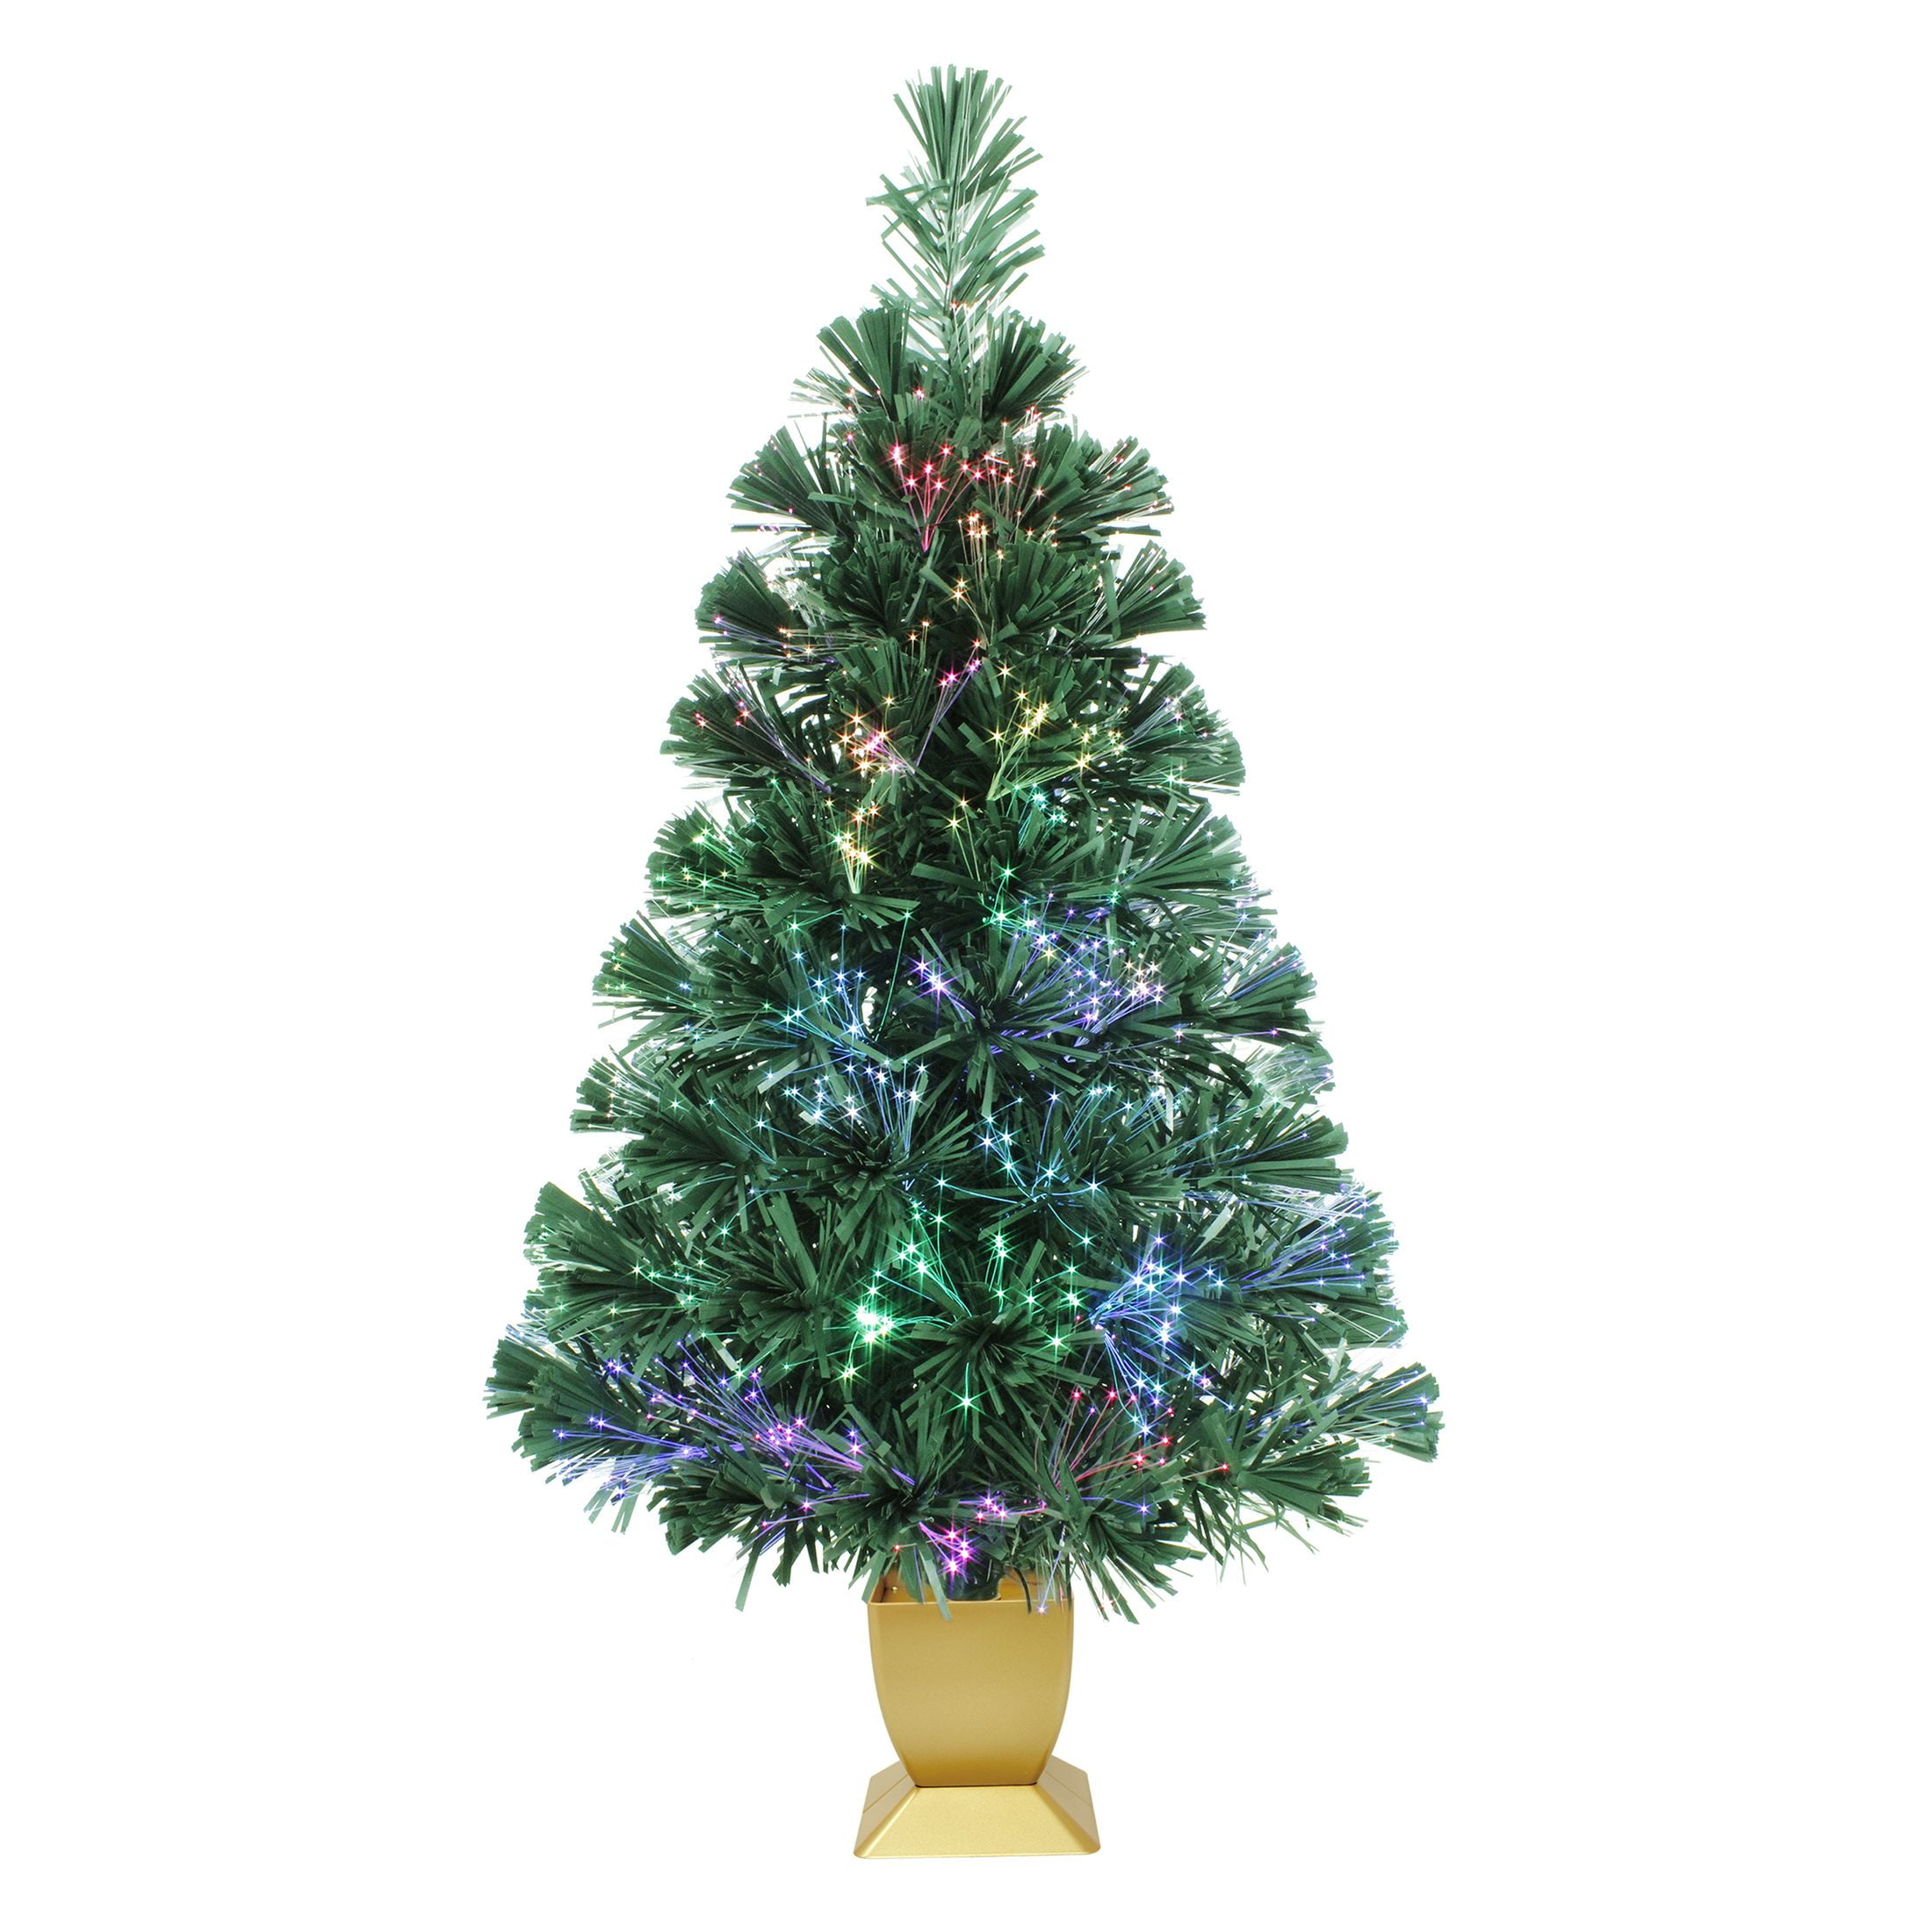 Holiday Time Prelit LED Fiber Optic Spruce Artificial Christmas Tree, 32'', Green